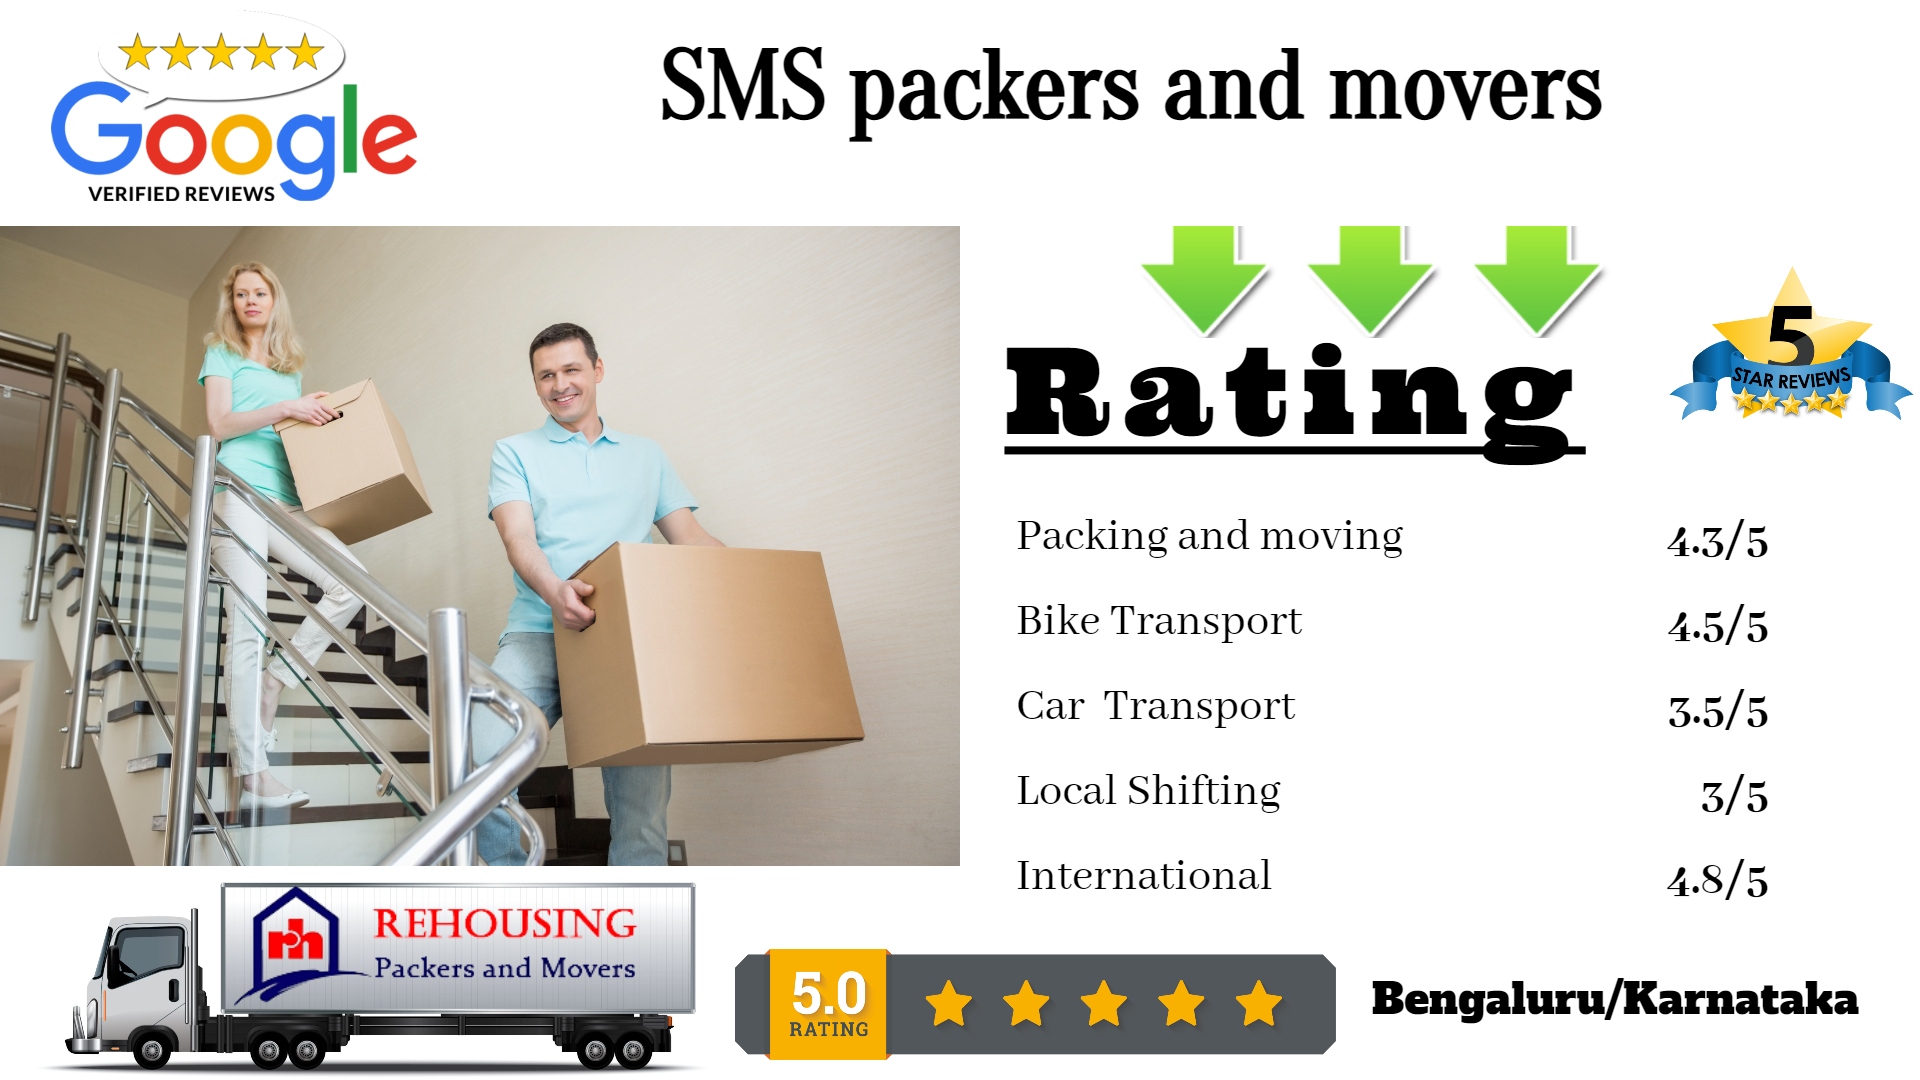 SMS packers and movers | Reviews Contact Details About